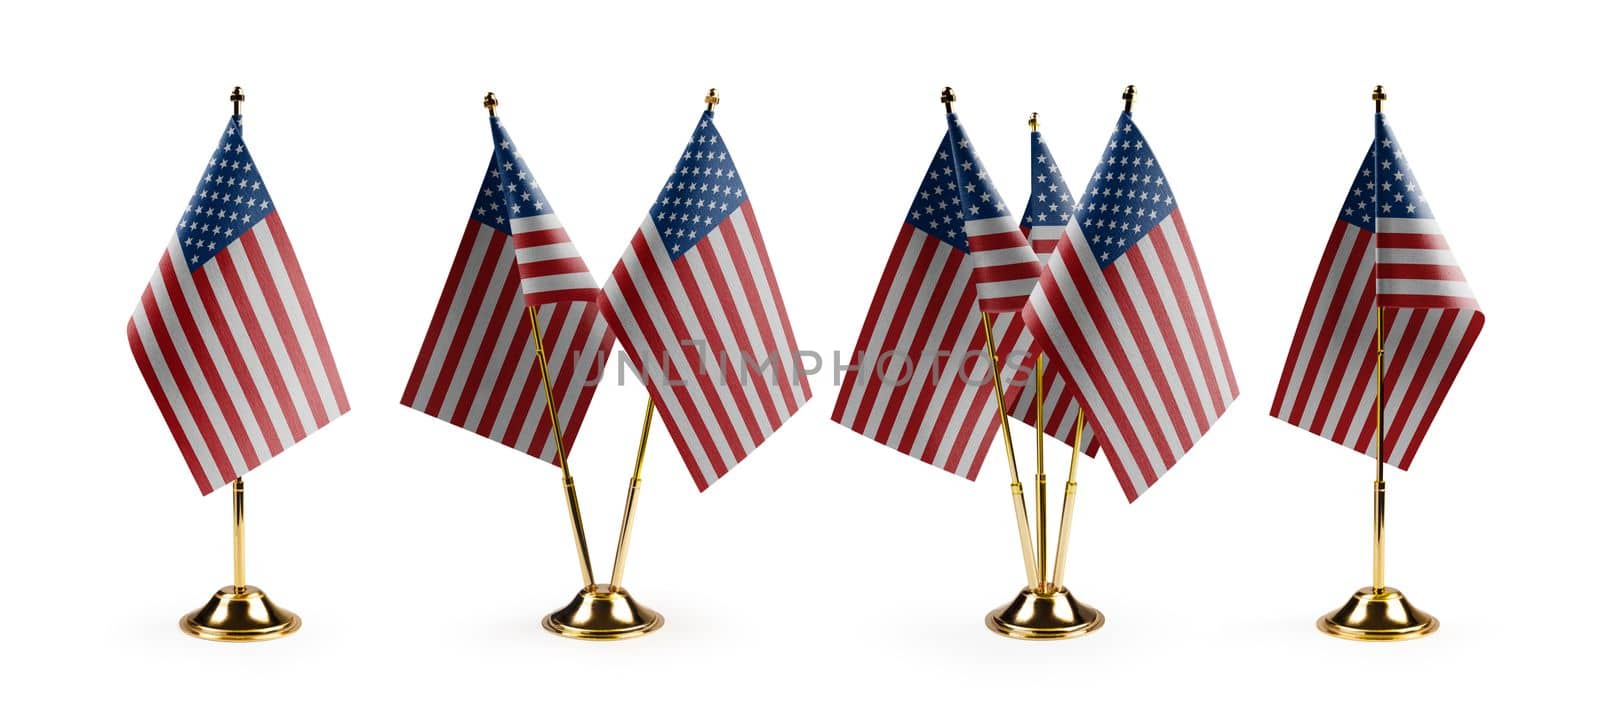 Small national flags of the USA on a white background by butenkow